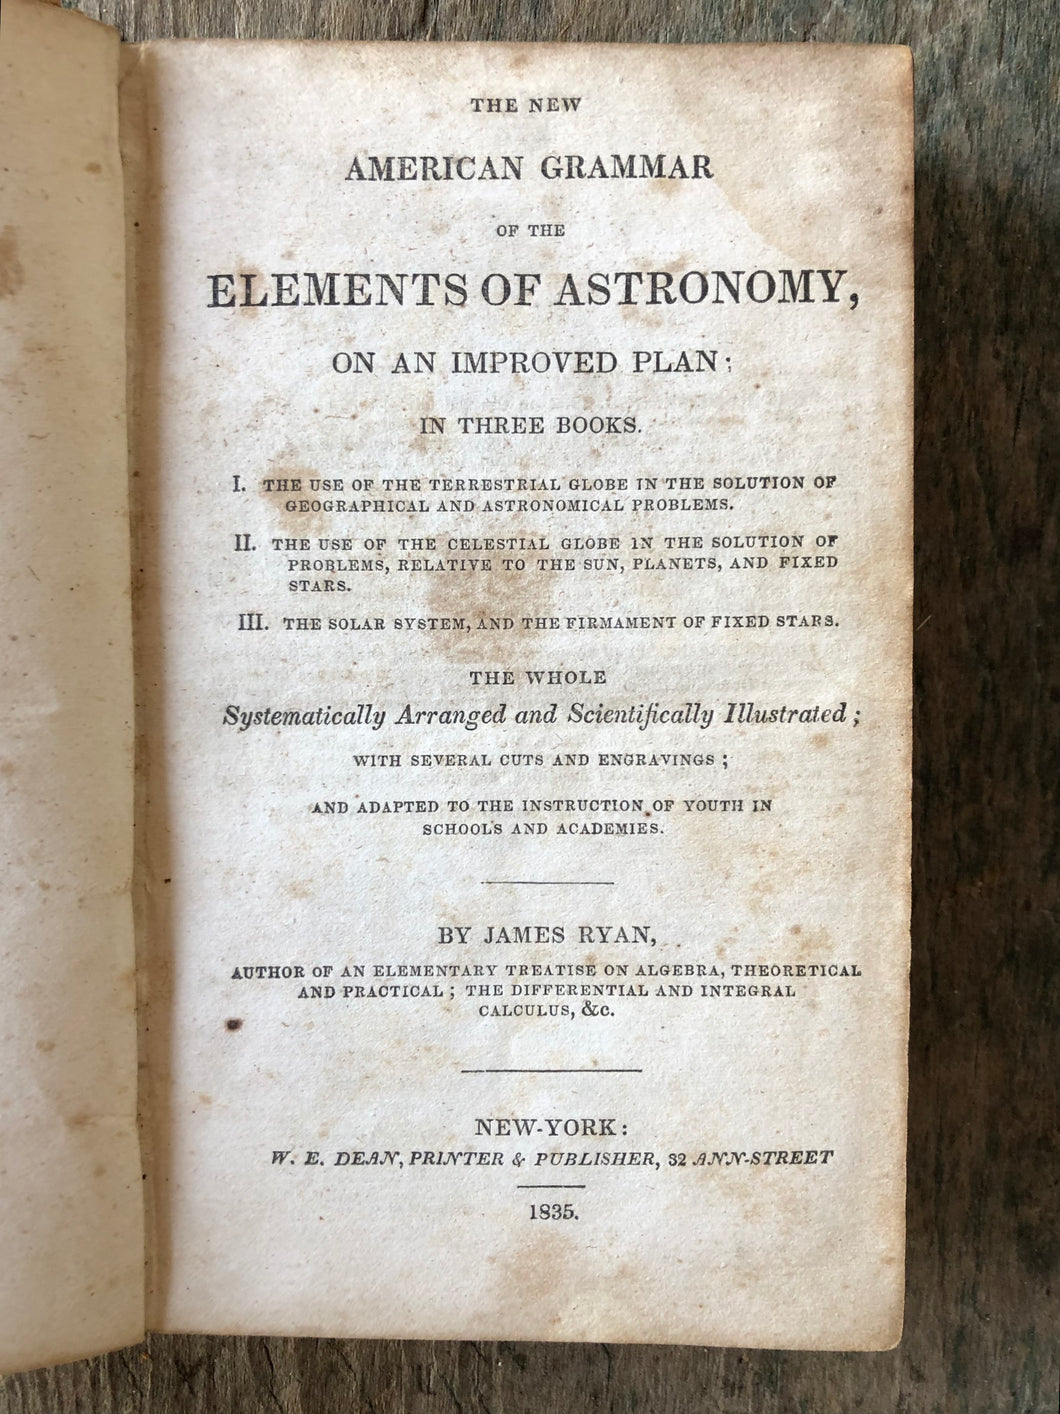 The New American Grammar of the Elements of Astronomy by James Ryan